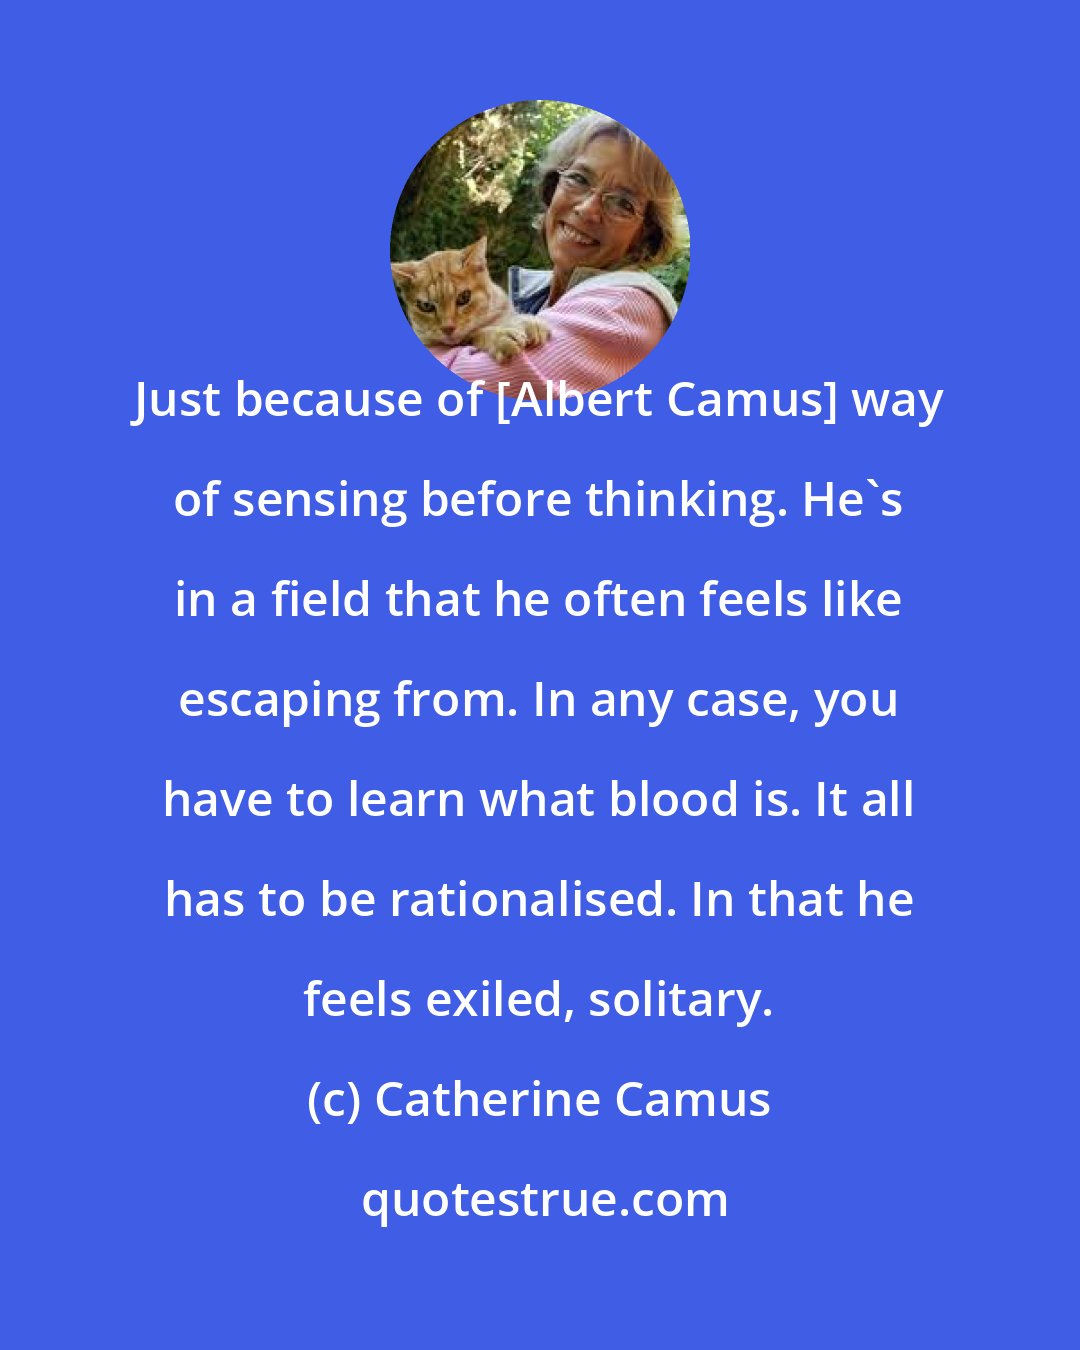 Catherine Camus: Just because of [Albert Camus] way of sensing before thinking. He's in a field that he often feels like escaping from. In any case, you have to learn what blood is. It all has to be rationalised. In that he feels exiled, solitary.